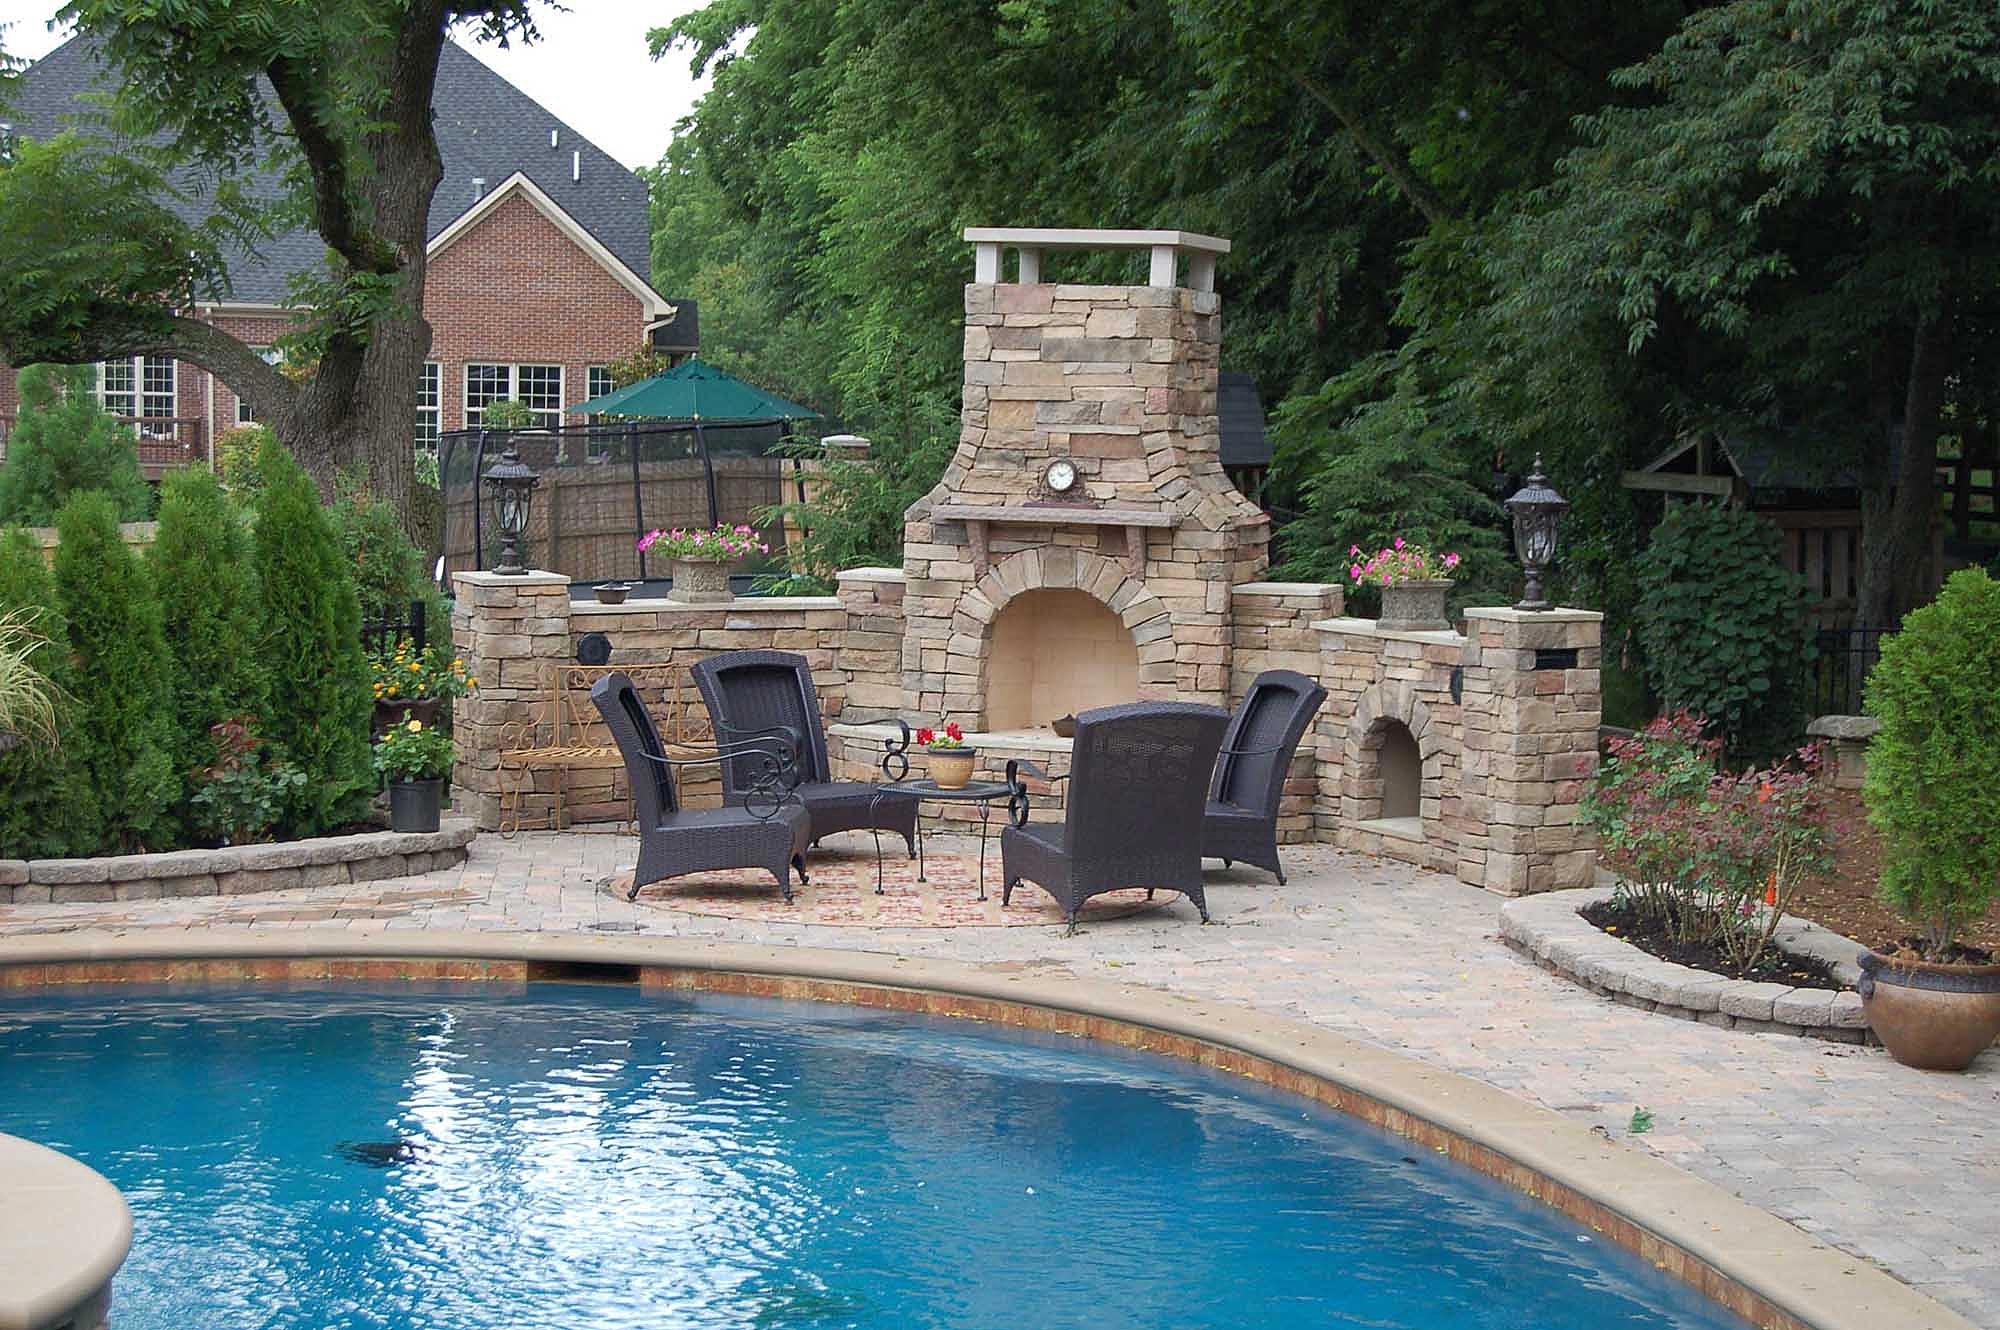 How To Make The Arch For An Outdoor Stone Fireplace